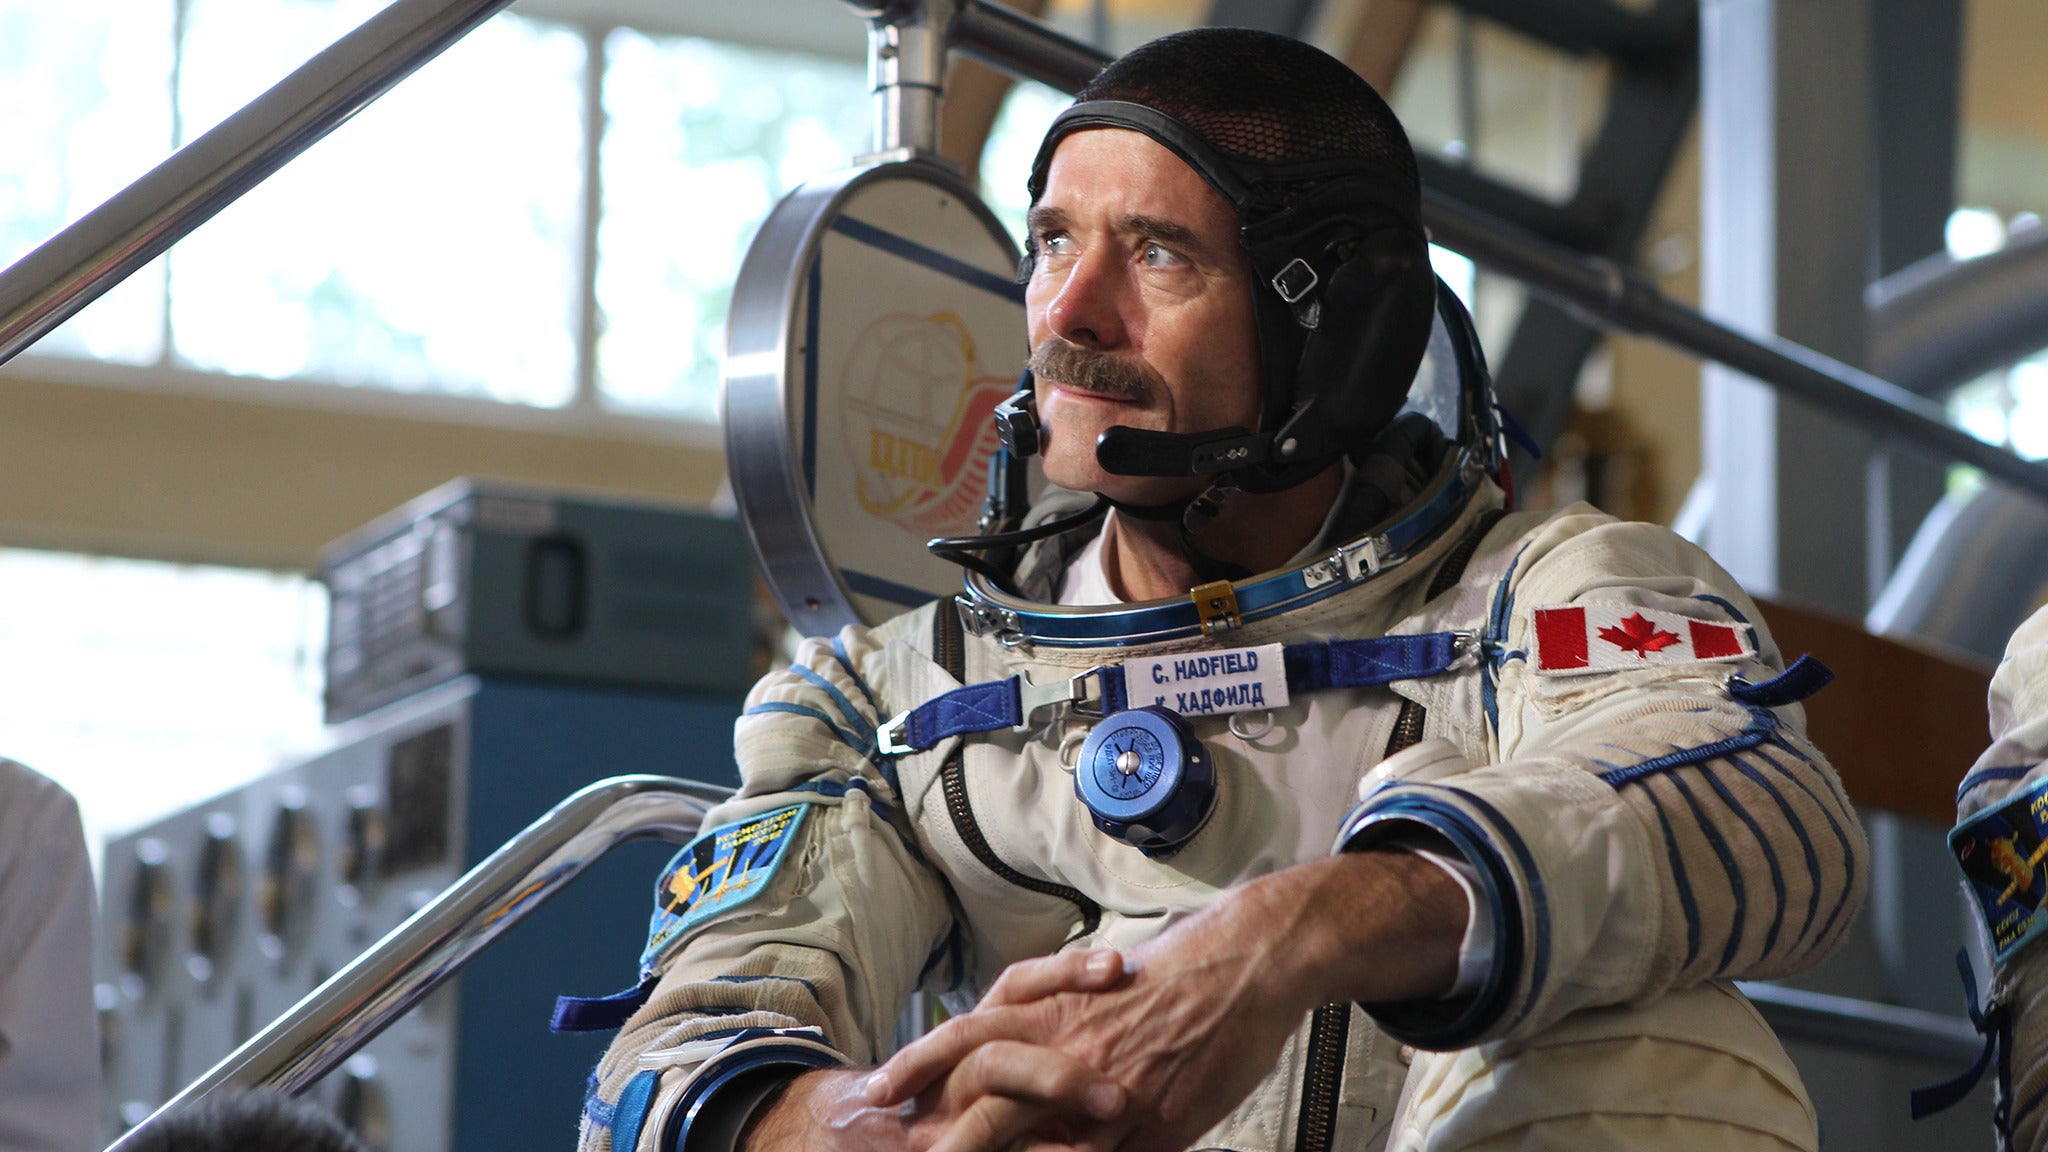 Chris Hadfield VIP Upgrade (No Ticket Included) in Vancouver promo photo for VIP Package presale offer code